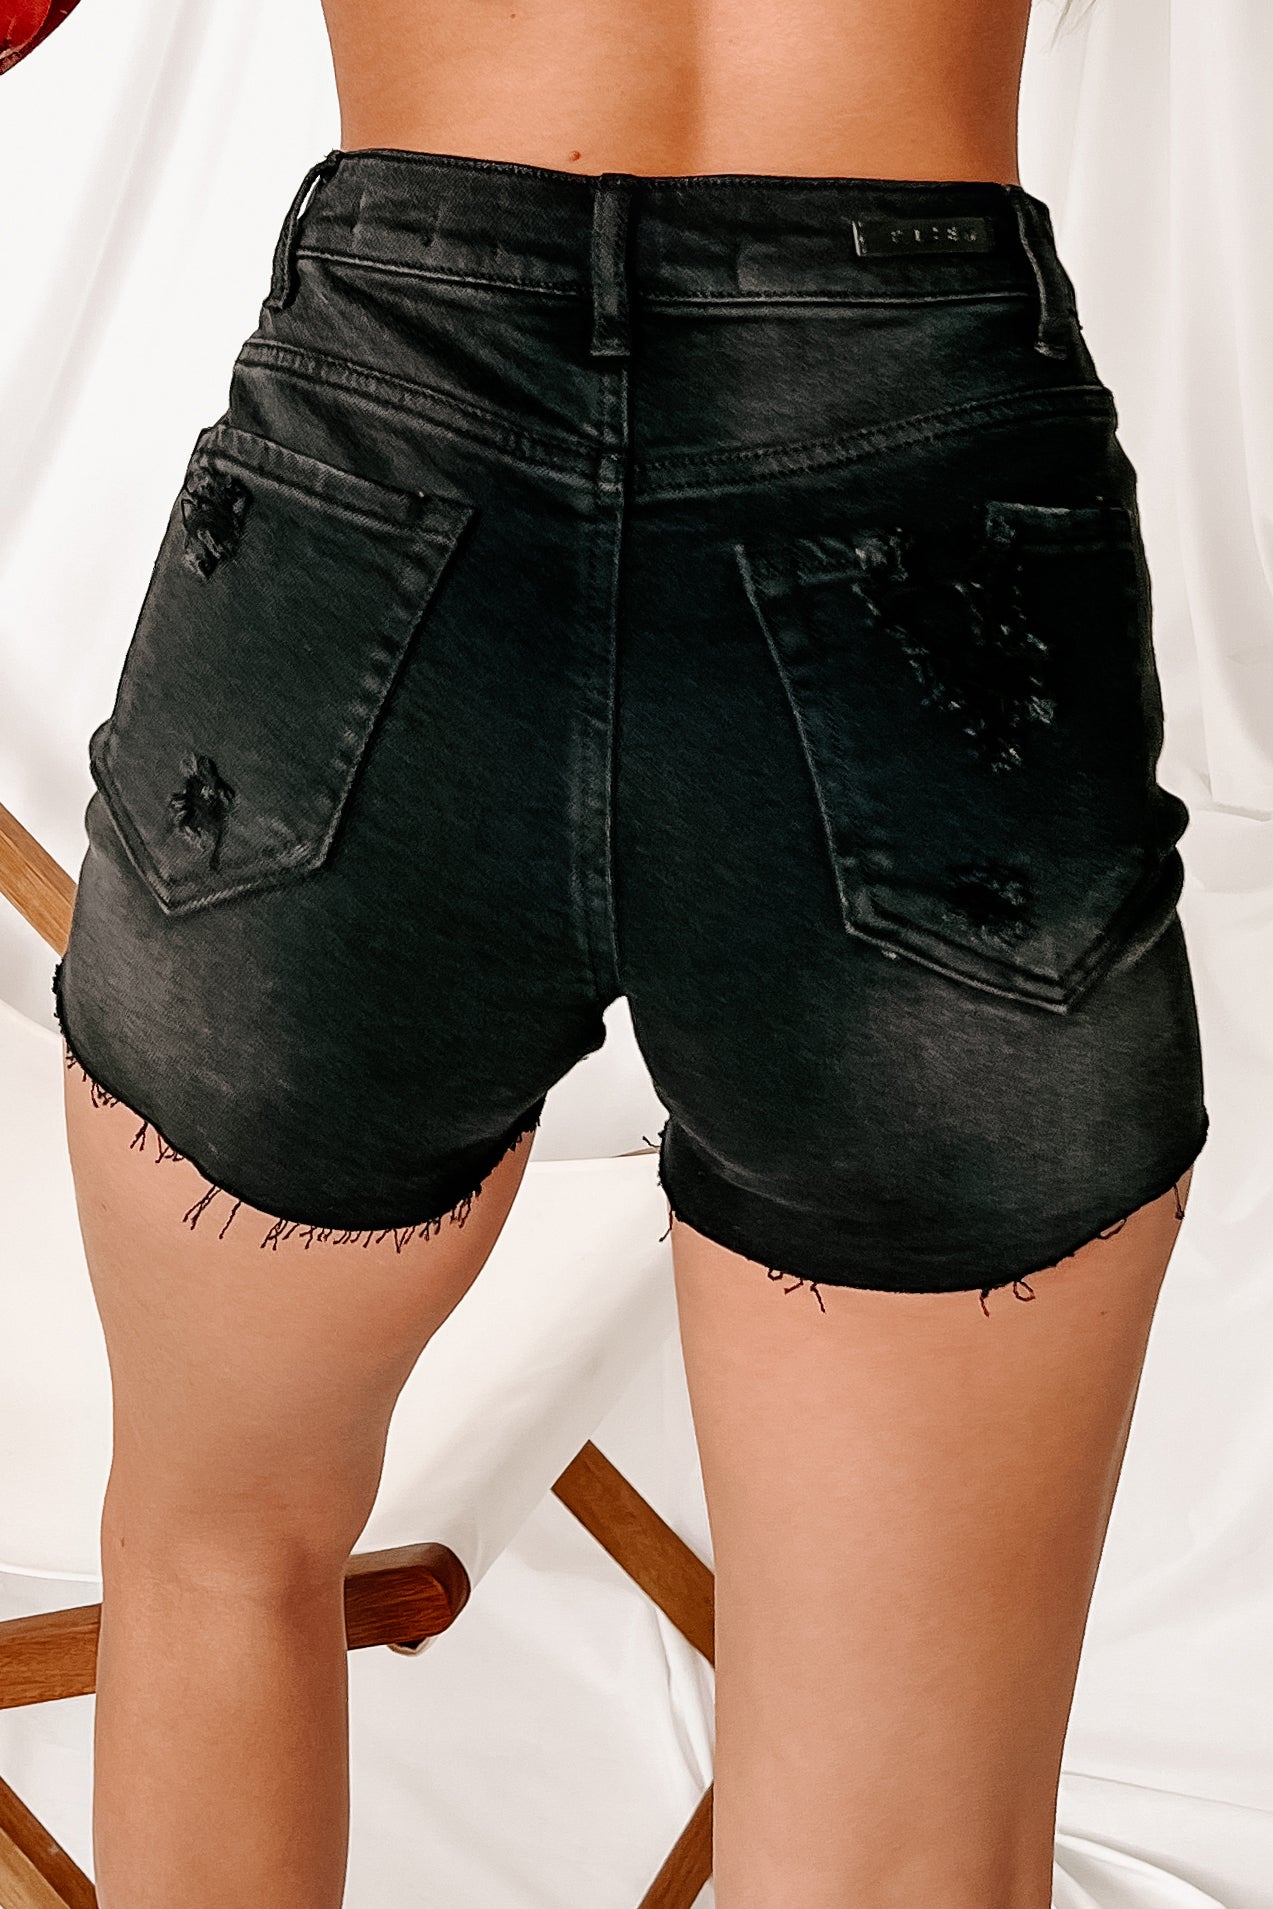 Closely Watching Button-Fly High Rise Distressed Denim Shorts (Black) - NanaMacs